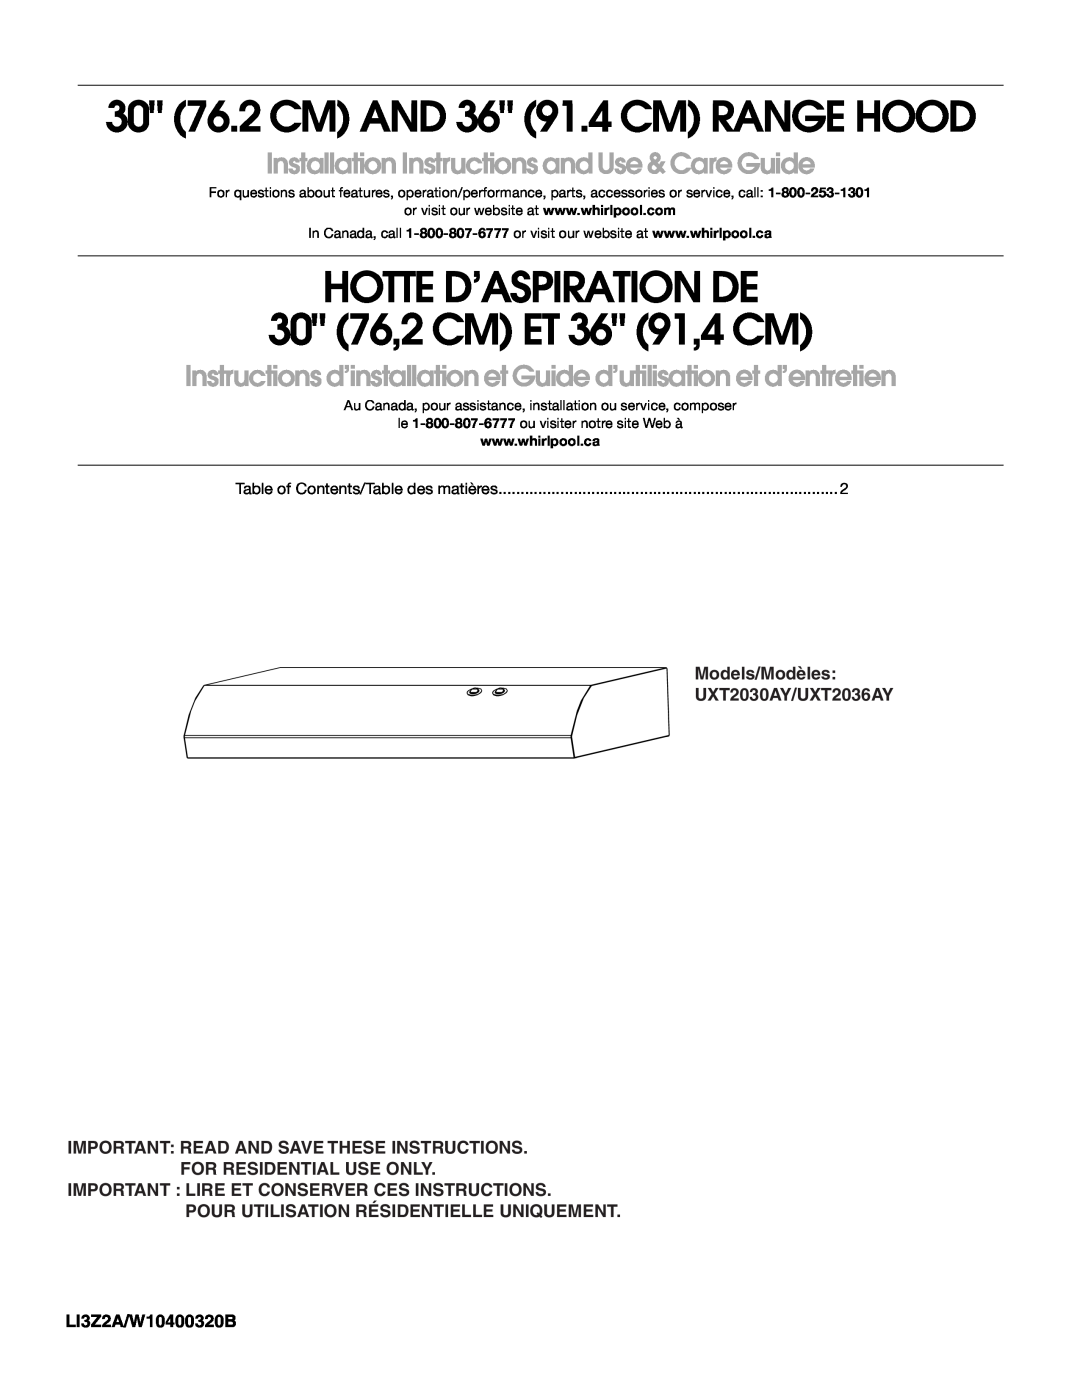 Whirlpool installation instructions Models/Modèles UXT2030AY/UXT2036AY, Important Read And Save These Instructions 